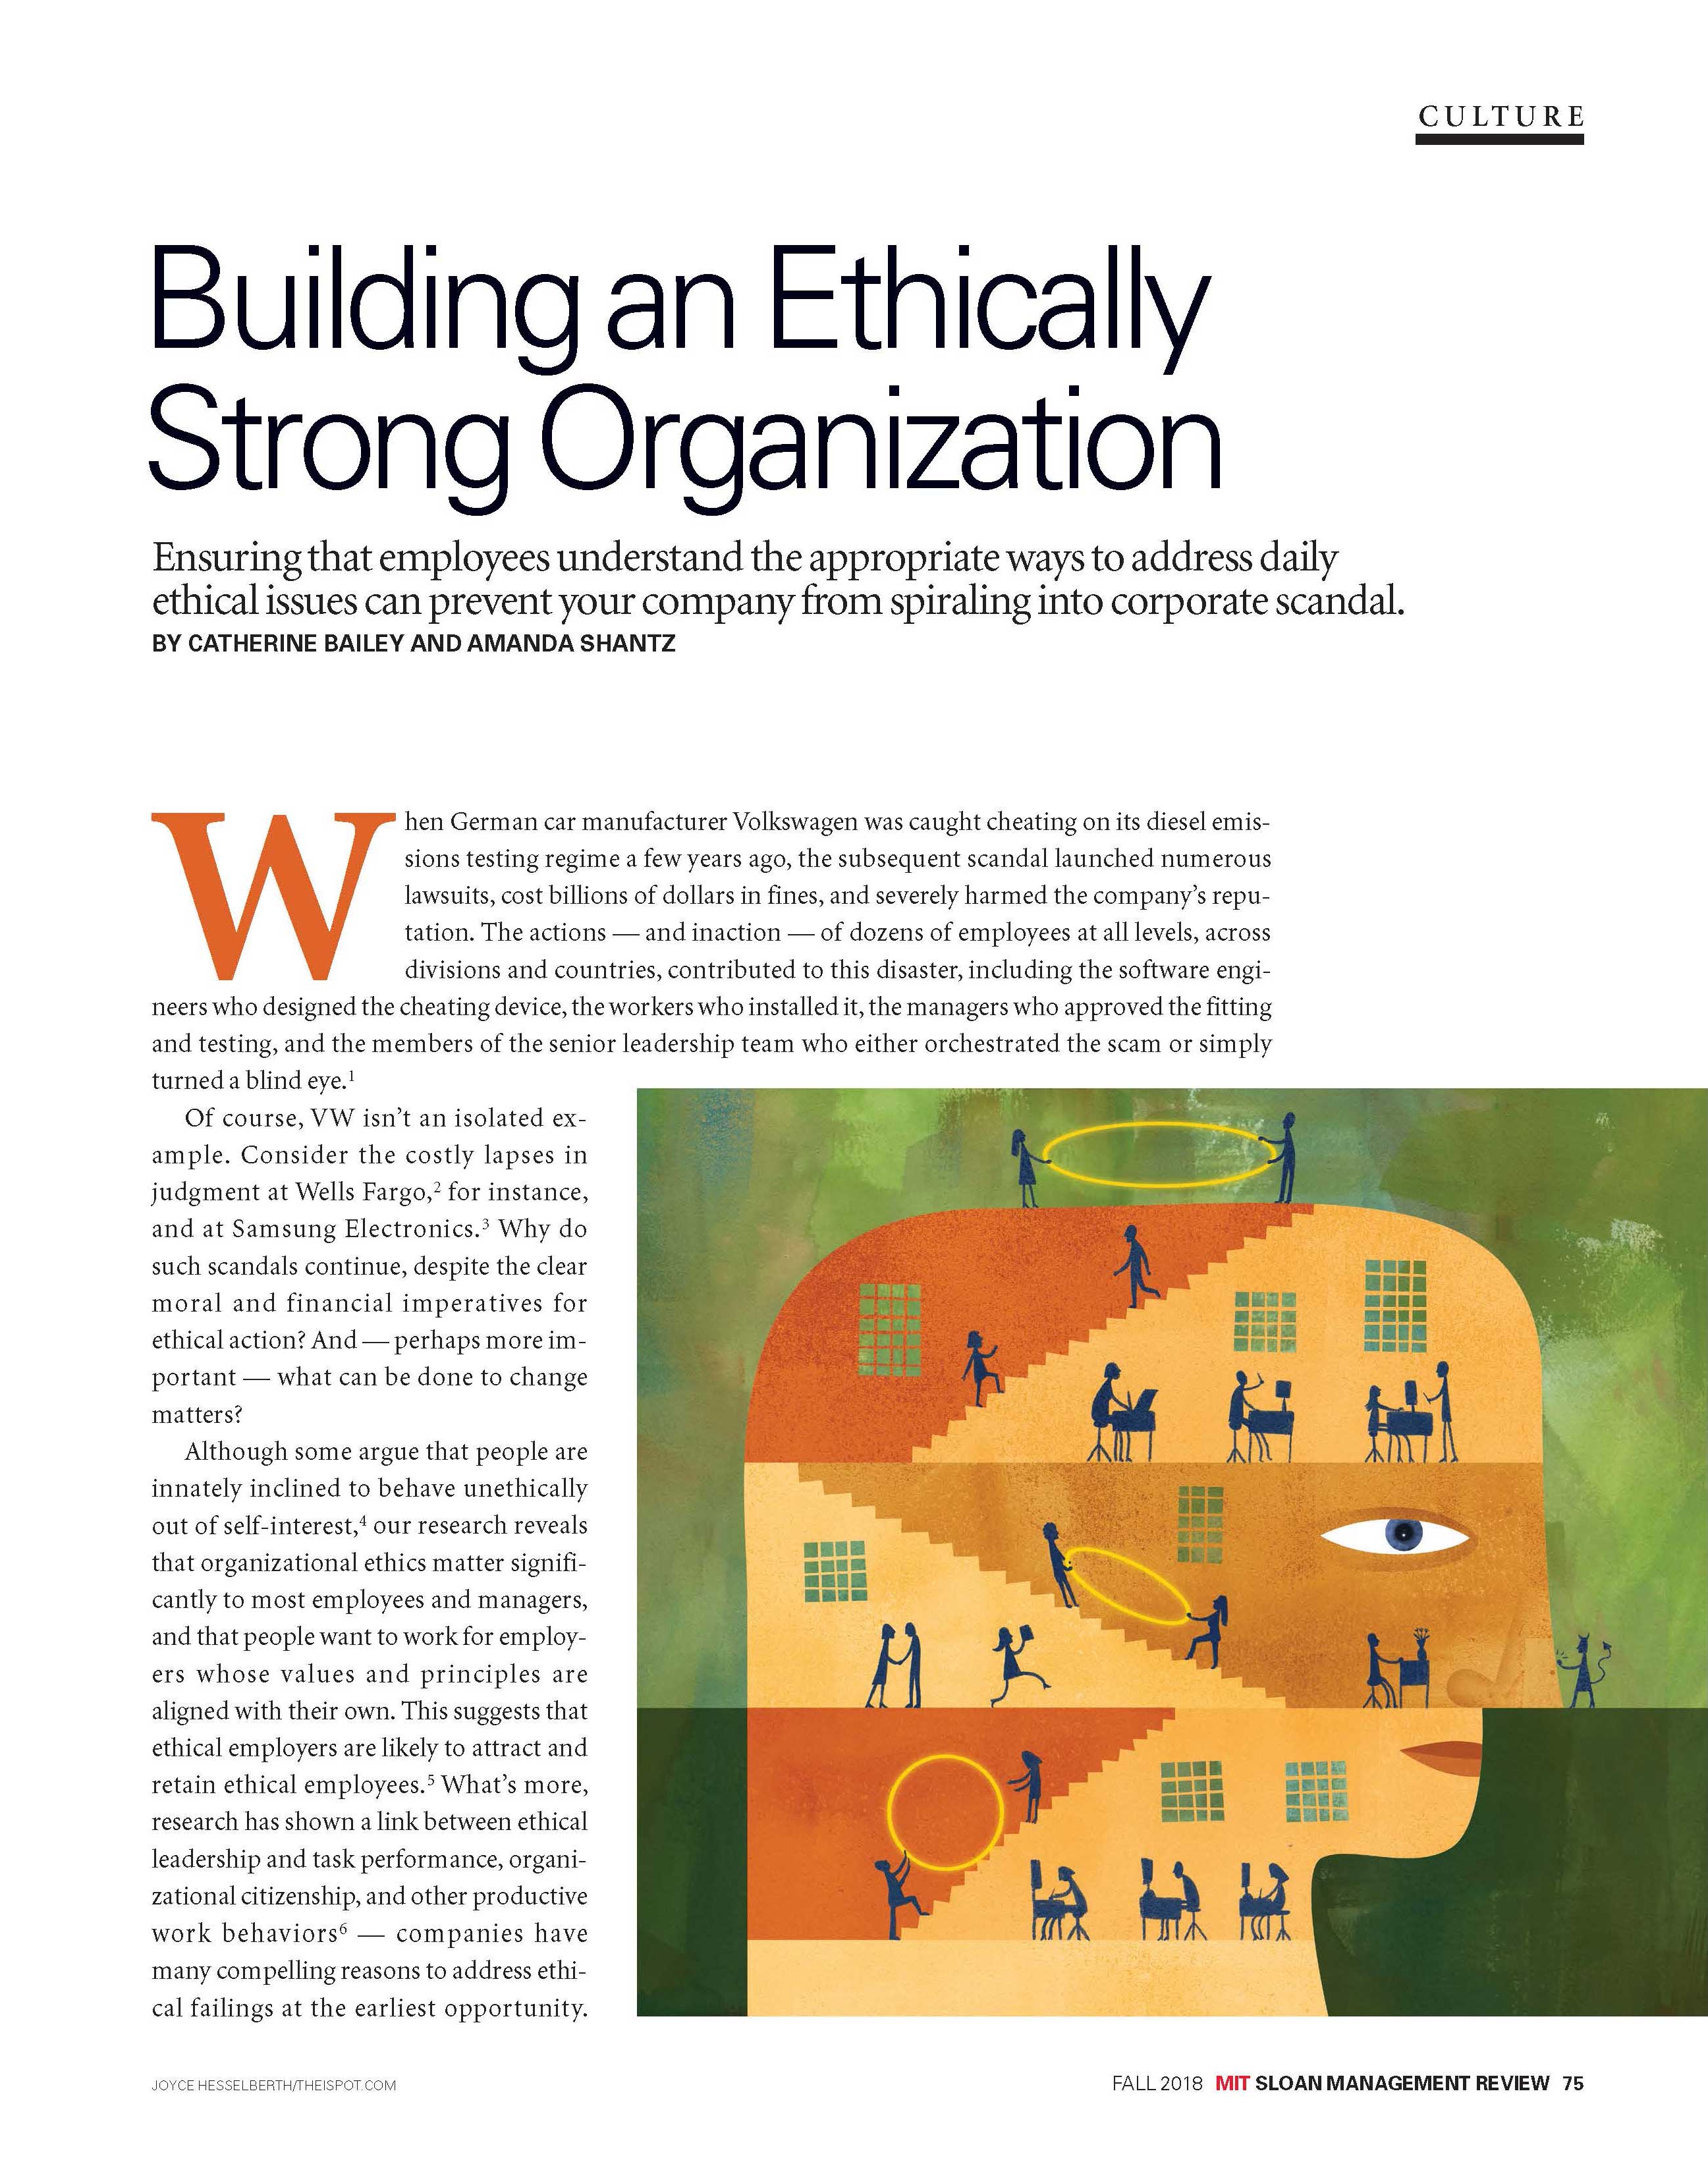 Building an Ethically Strong Organization